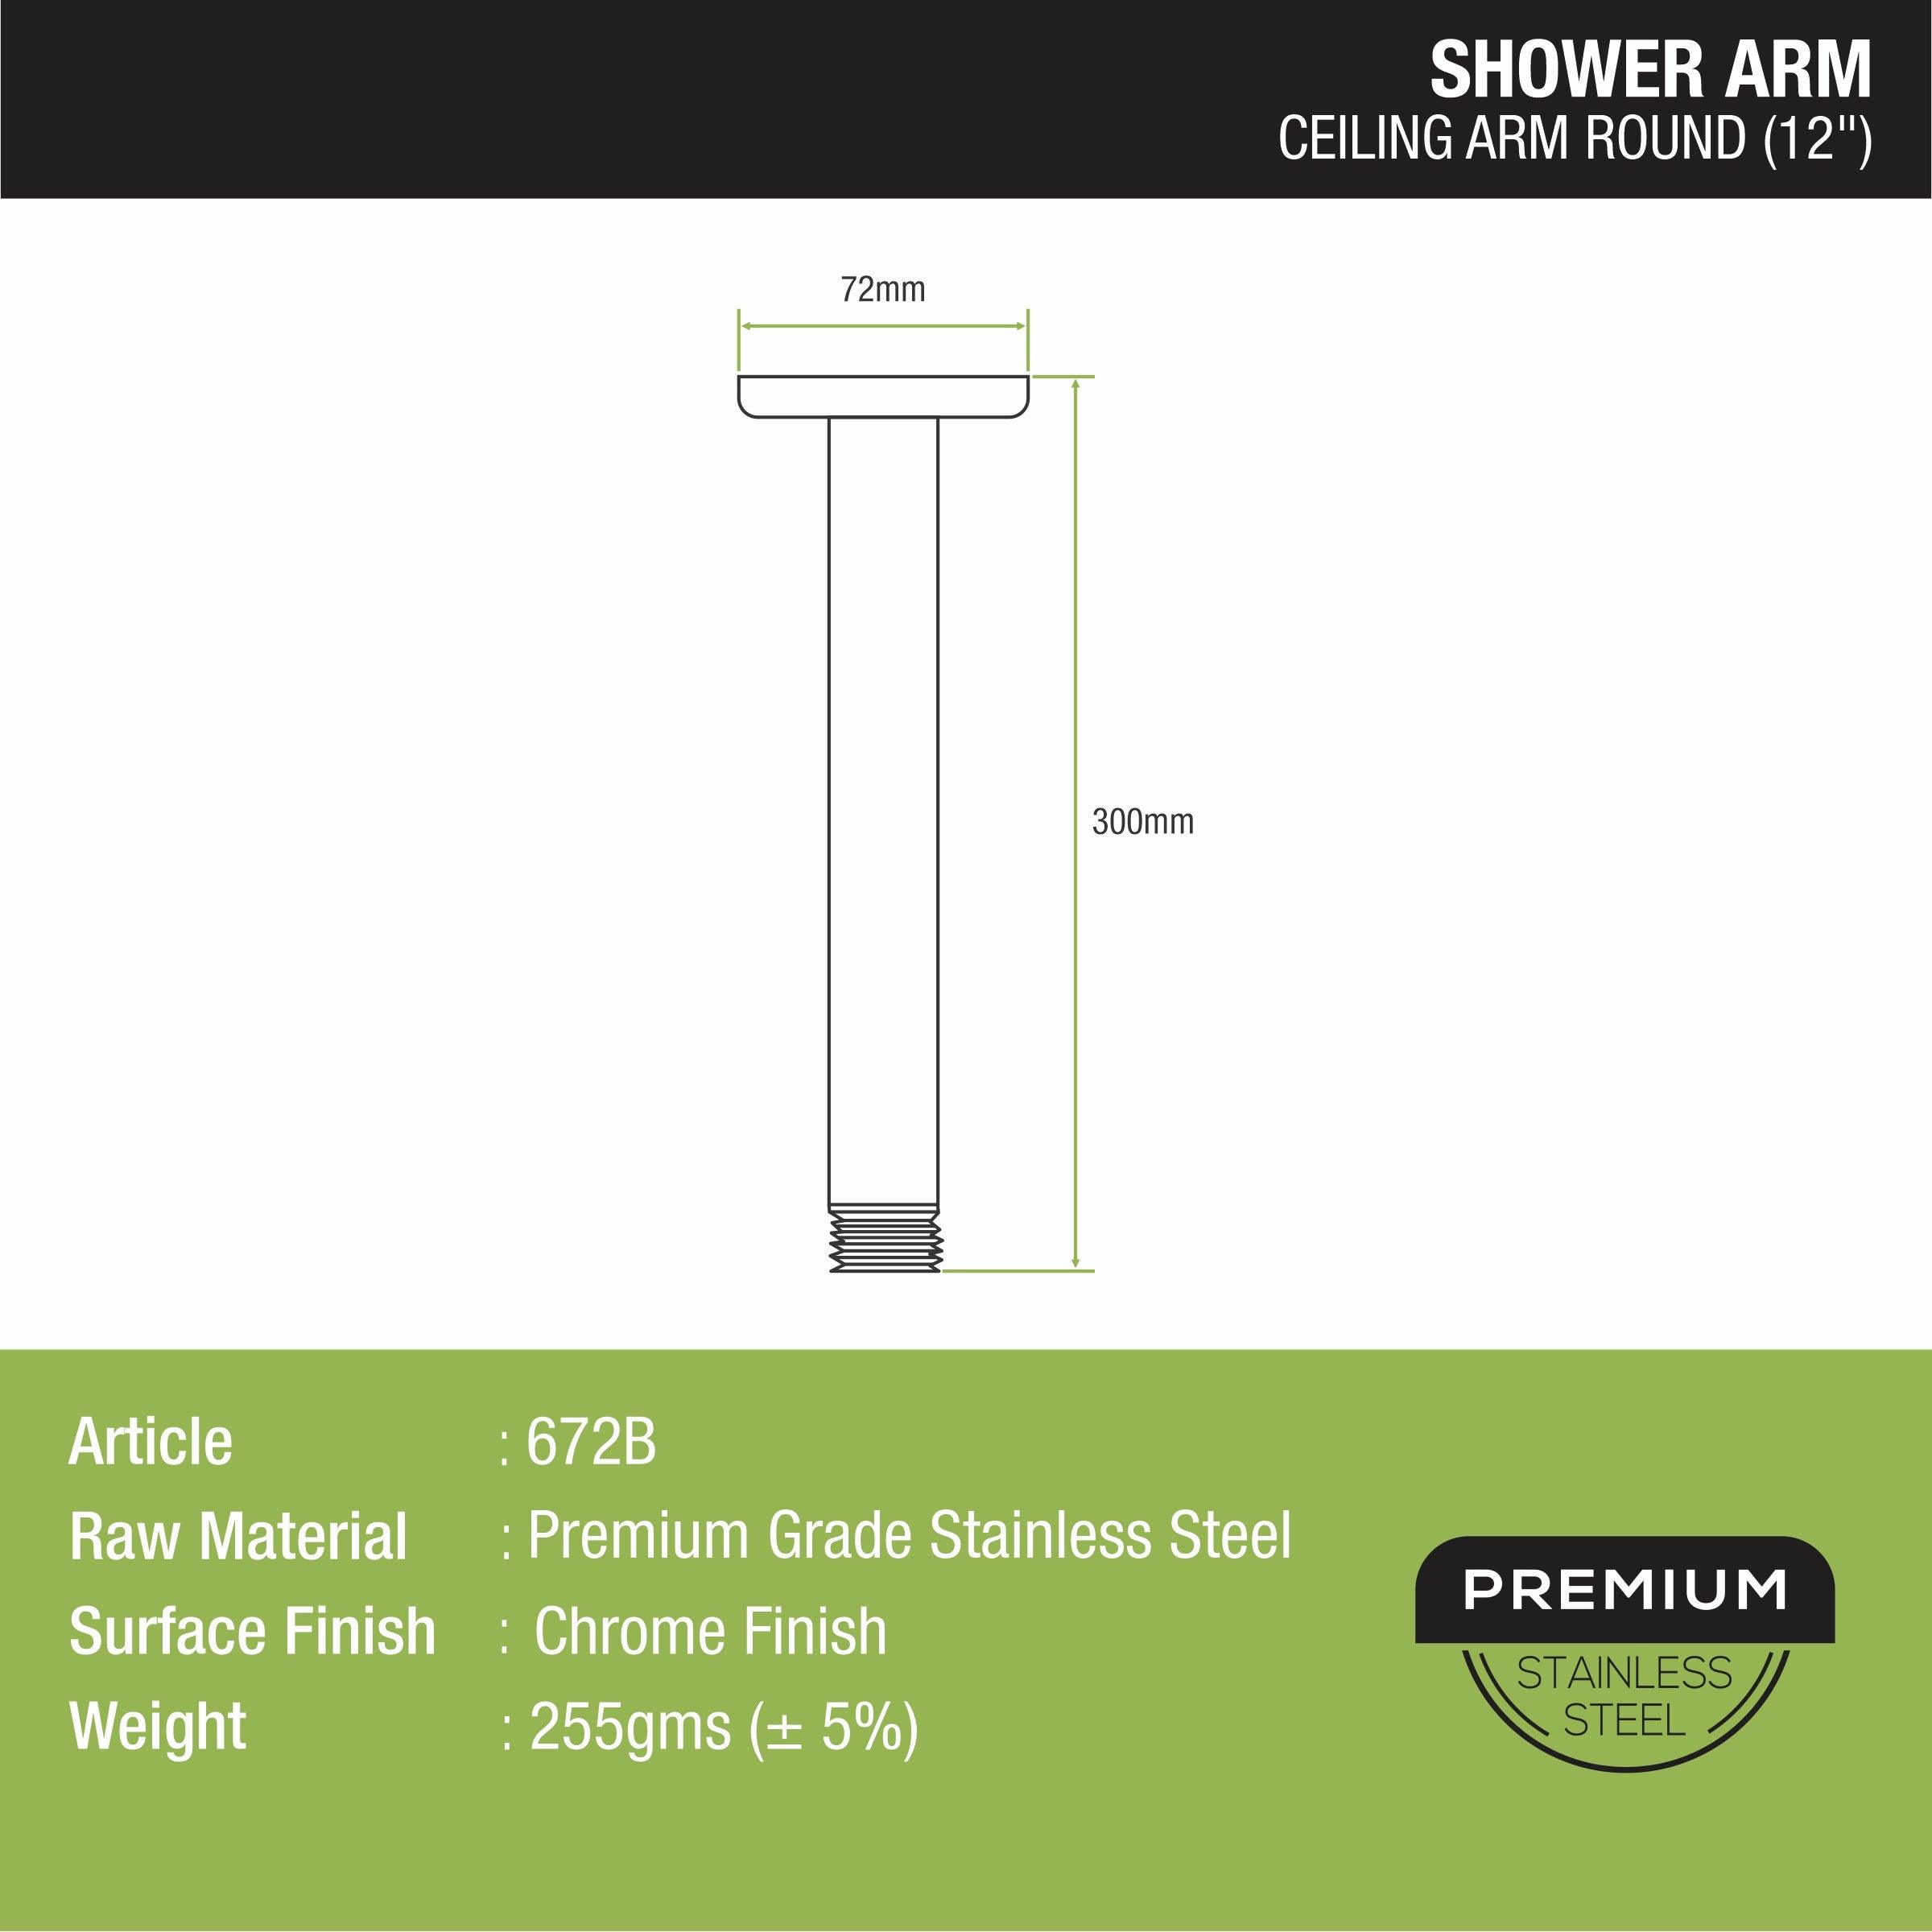 Ceiling Round Shower Arm (12 Inches) sizes and dimensions